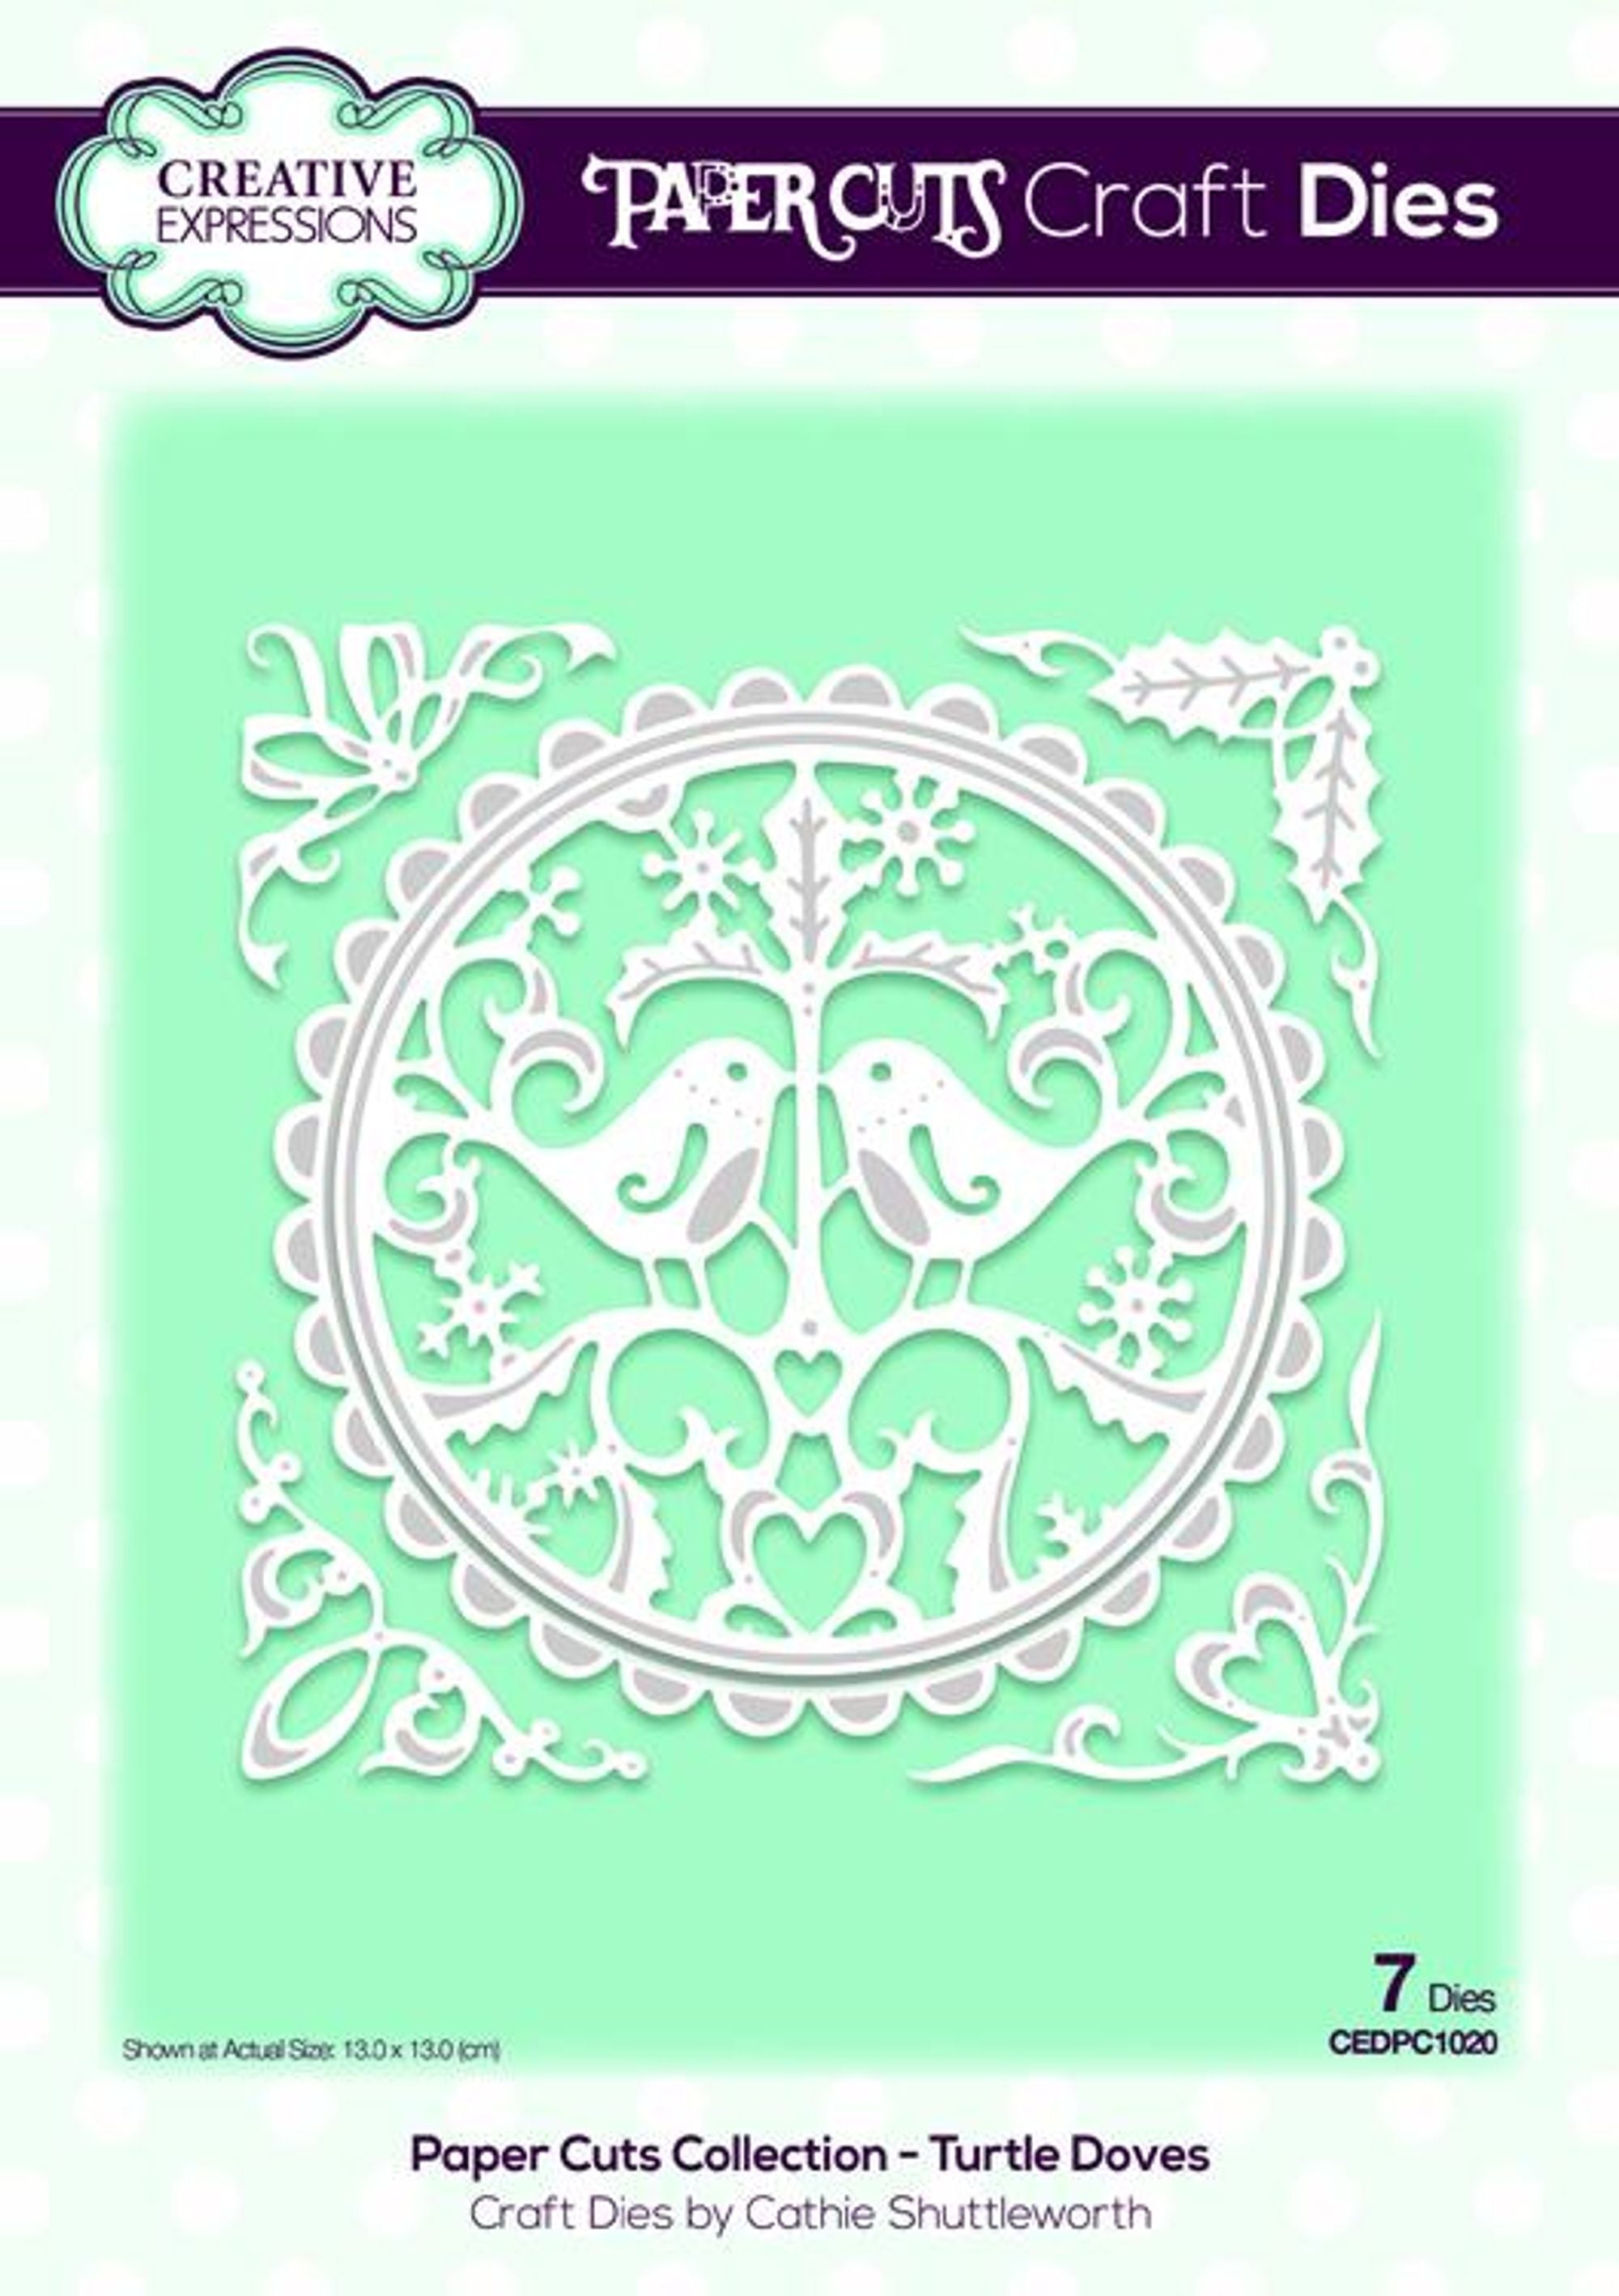 Creative Expressions Die Paper Cuts Collection - Turtle Doves